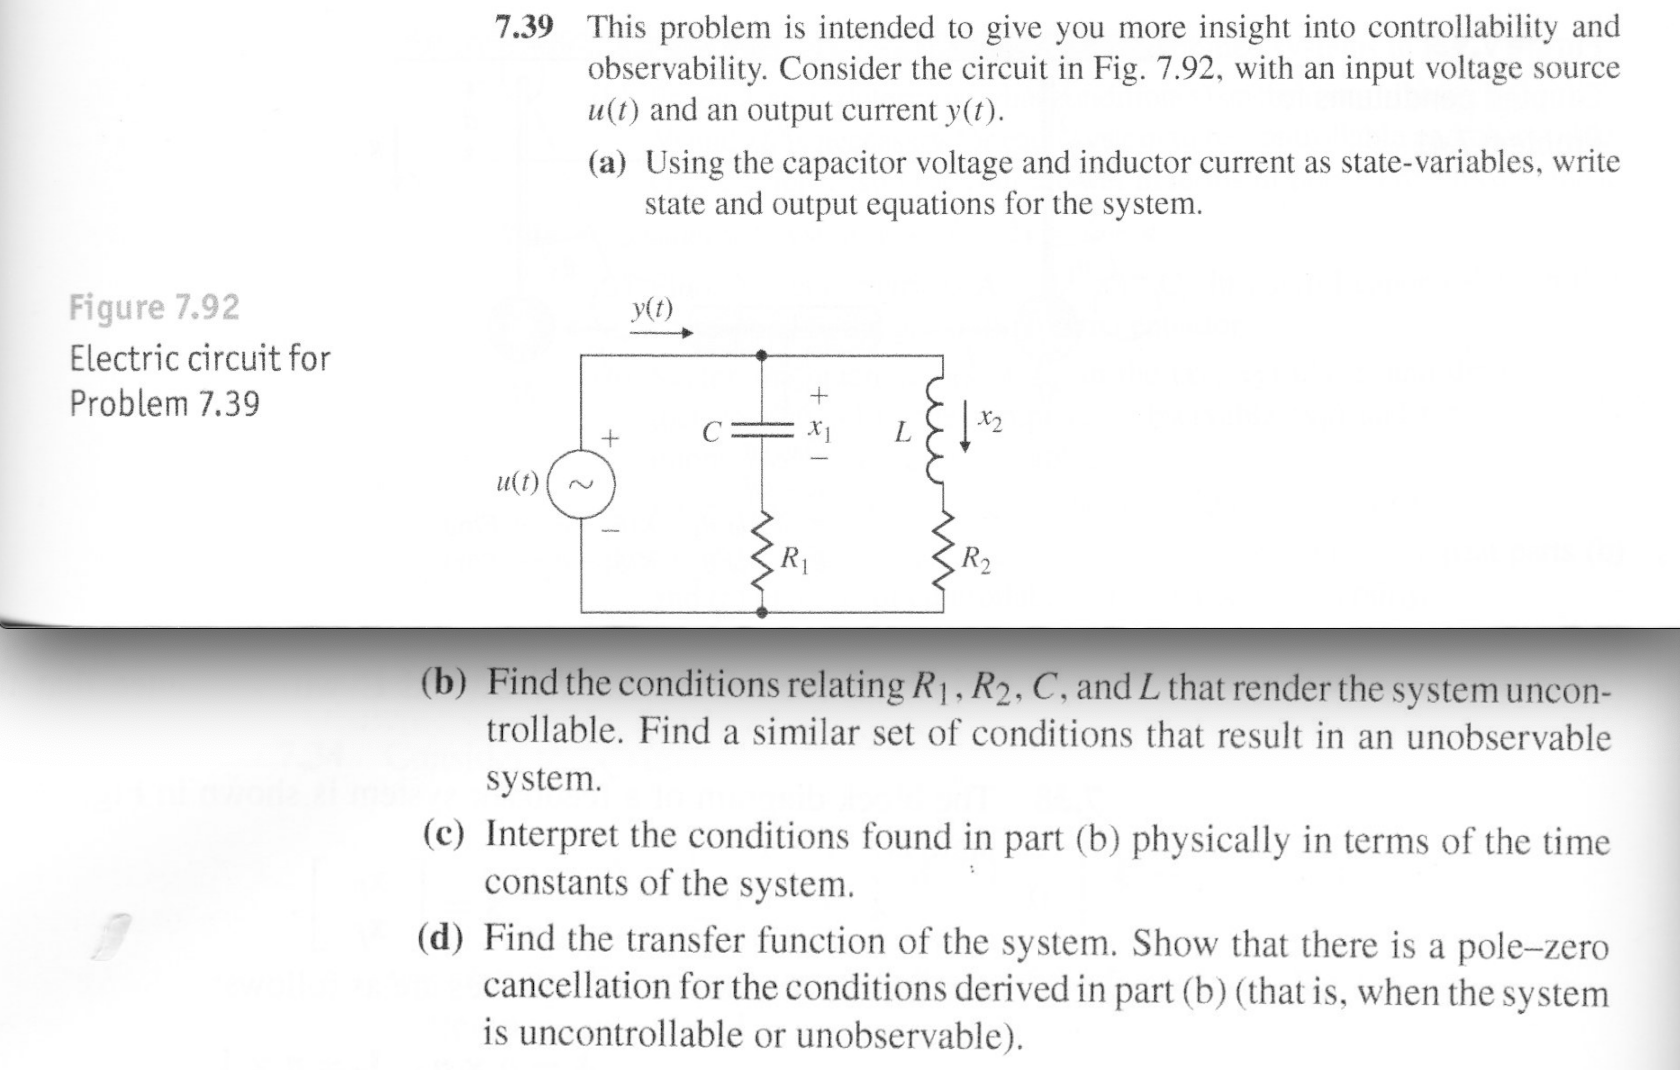 7.39 This problem is intended to give you more insight into controllability and
observability. Consider the circuit in Fig. 7.92, with an input voltage
u(t) and an output current y(t).
Source
(a) Using the capacitor voltage and inductor current as state-variables, write
state and output equations for the system
Figure 7.92
y(t)
Electric circuit for
Problem 7.39
+
u(t)
R2
(b) Find the conditions relating R1, R2, C, and L that render the system uncon-
trollable. Find a similar set of conditions that result in an unobservable
system
(c) Interpret the conditions found in part (b) physically in terms of the time
constants of the system
(d) Find the transfer function of the system. Show that there is a pole-zero
cancellation for the conditions derived in part (b) (that is, when the system
is uncontrollable or unobservable)
